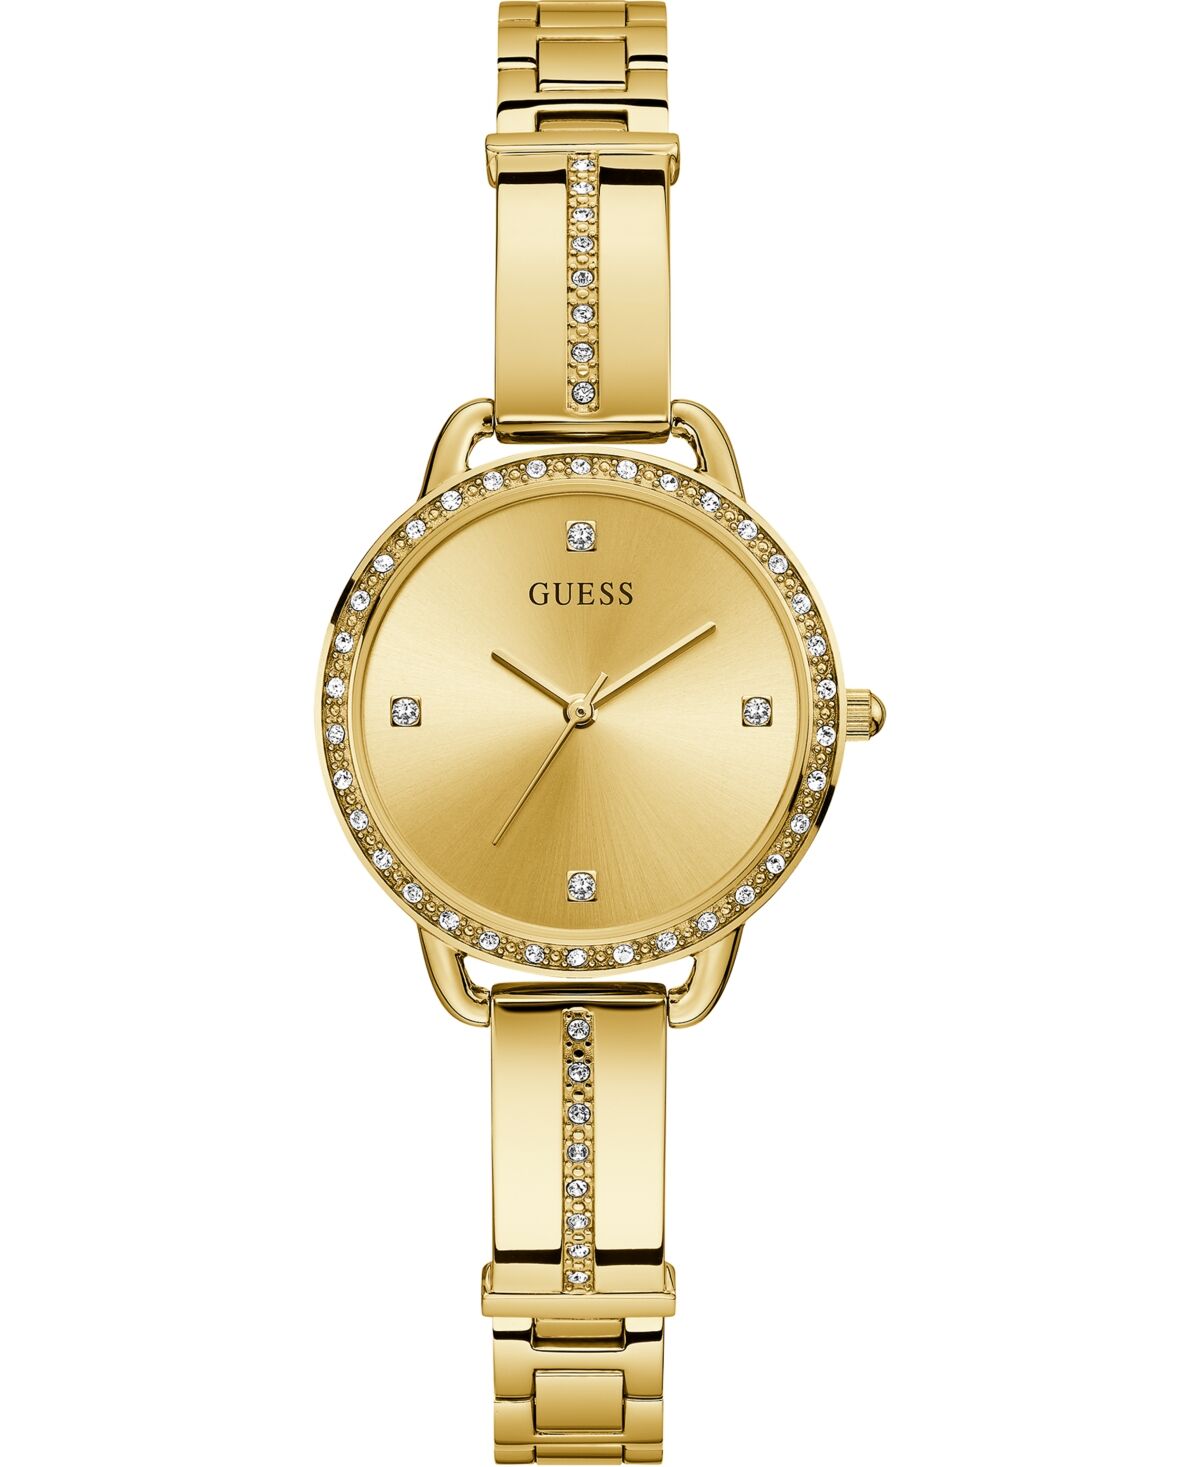 Guess Women's Gold-Tone Stainless Steel Semi-Bangle Bracelet Watch 30mm - Gold